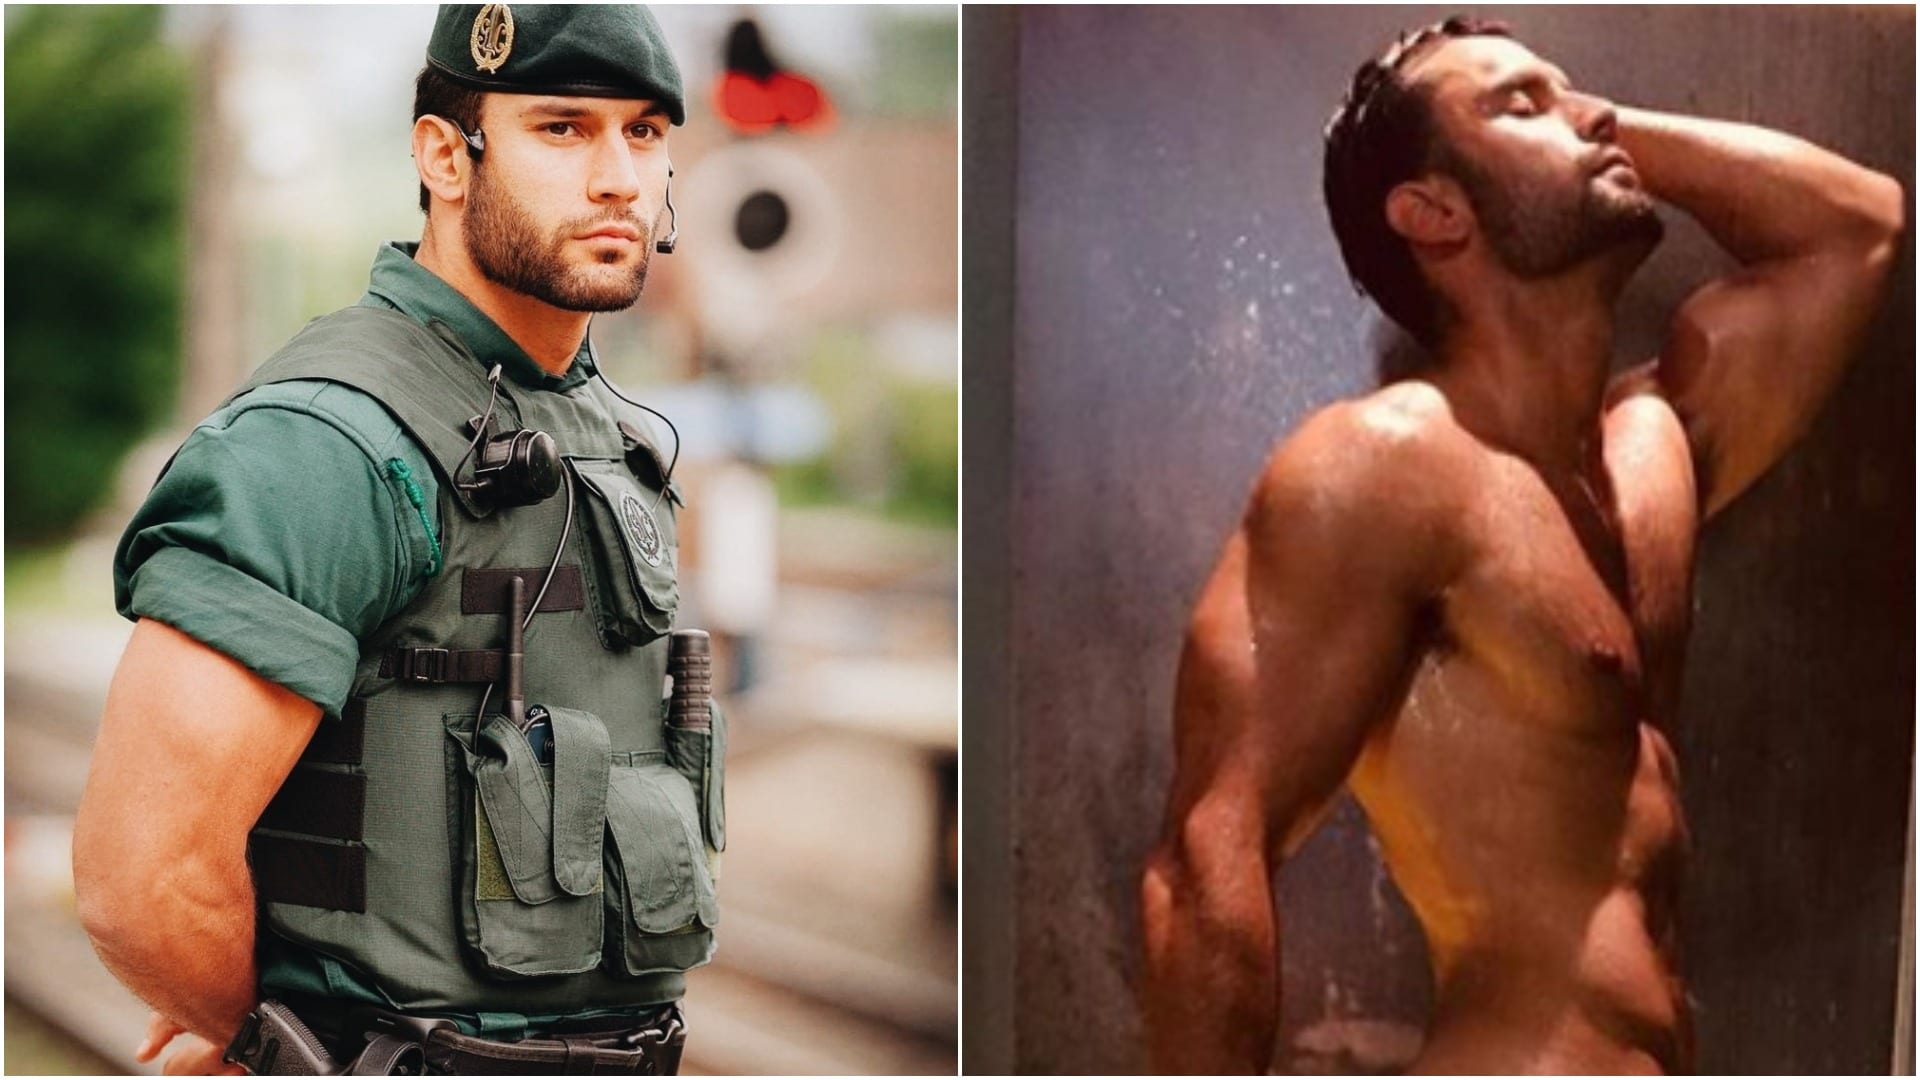 Spain S Hot Cop Goes Viral AGAIN After Almost Revealing All In Steamy Shower Pic Olive Press